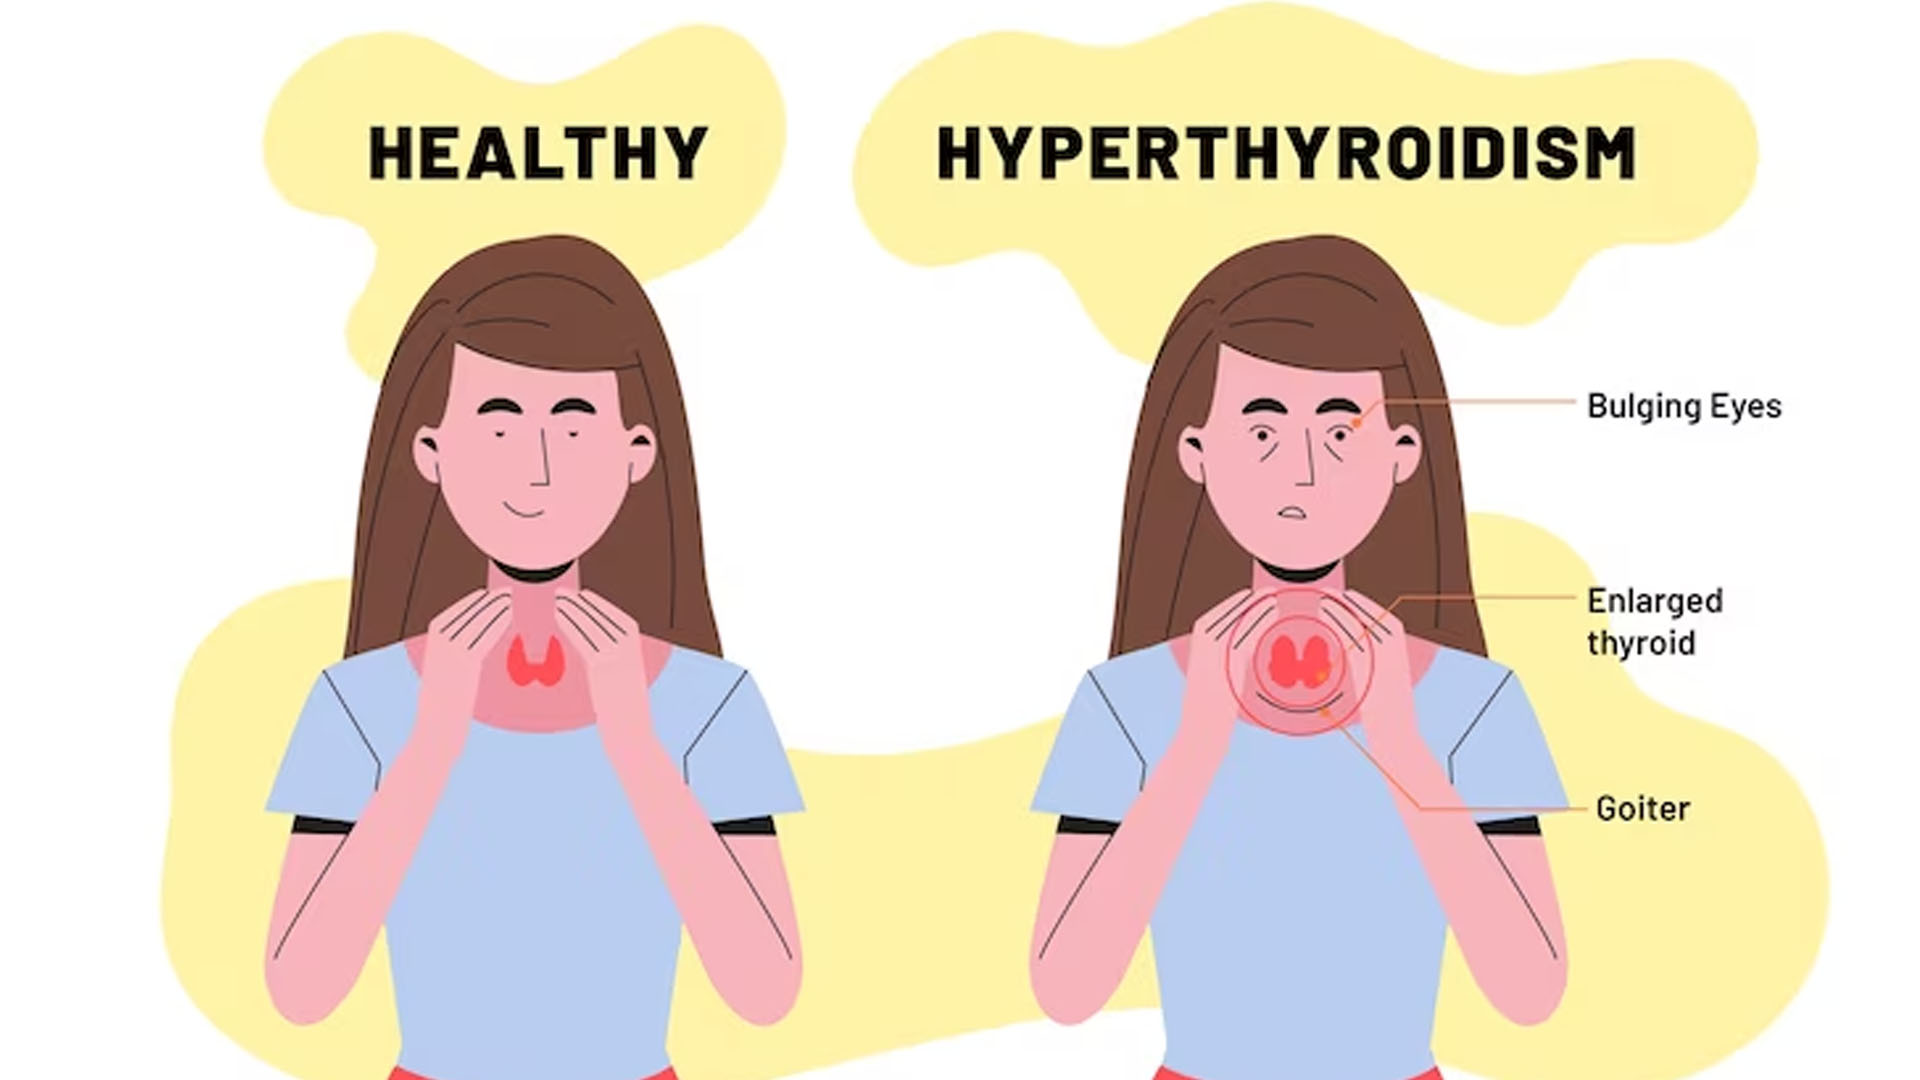 What are the Home Remedies for Hyperthyroidism?